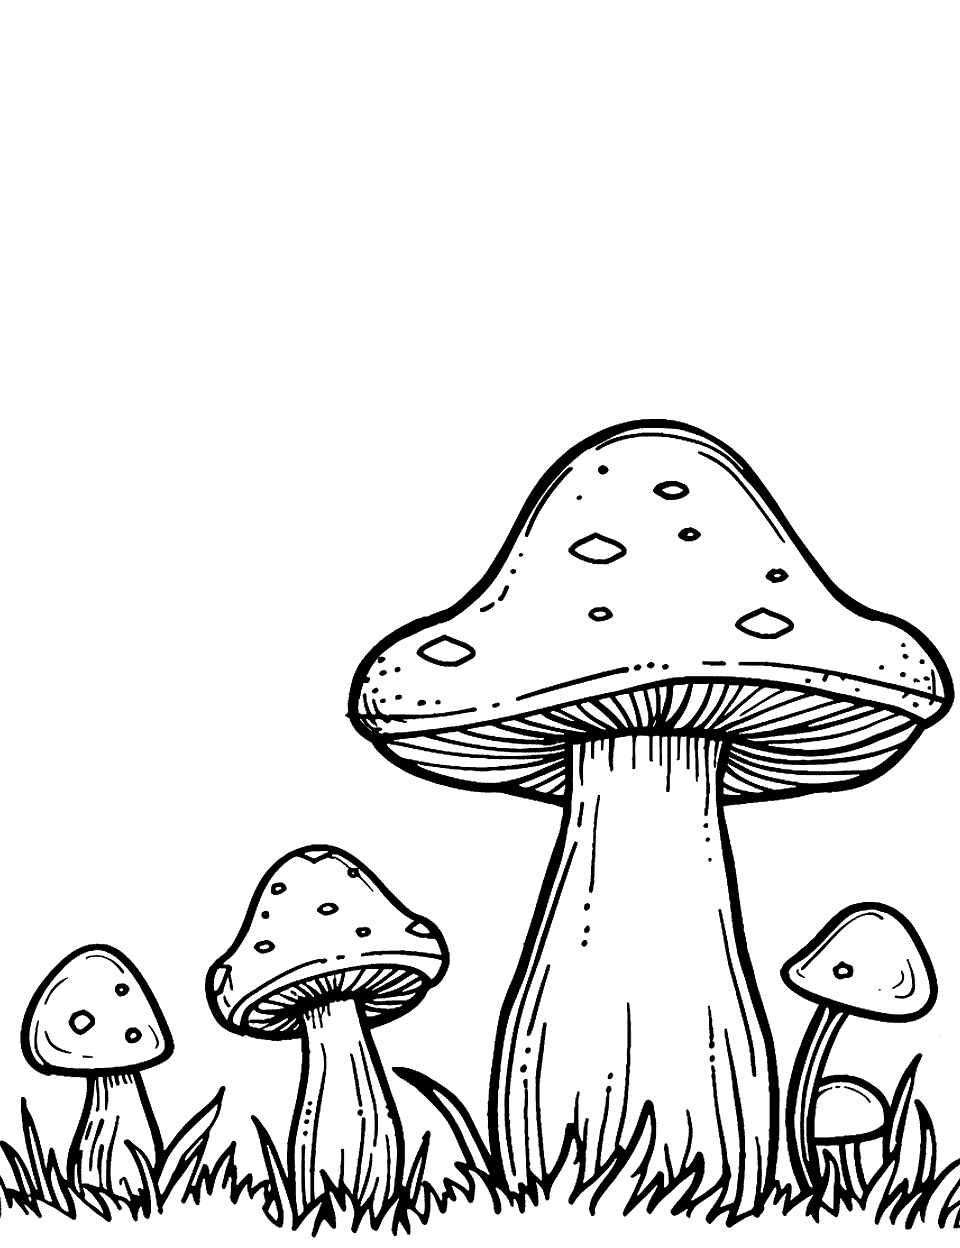 Simple Mushroom Landscape Coloring Page - Several plain mushrooms of different sizes in a line, with minimal grass around them.